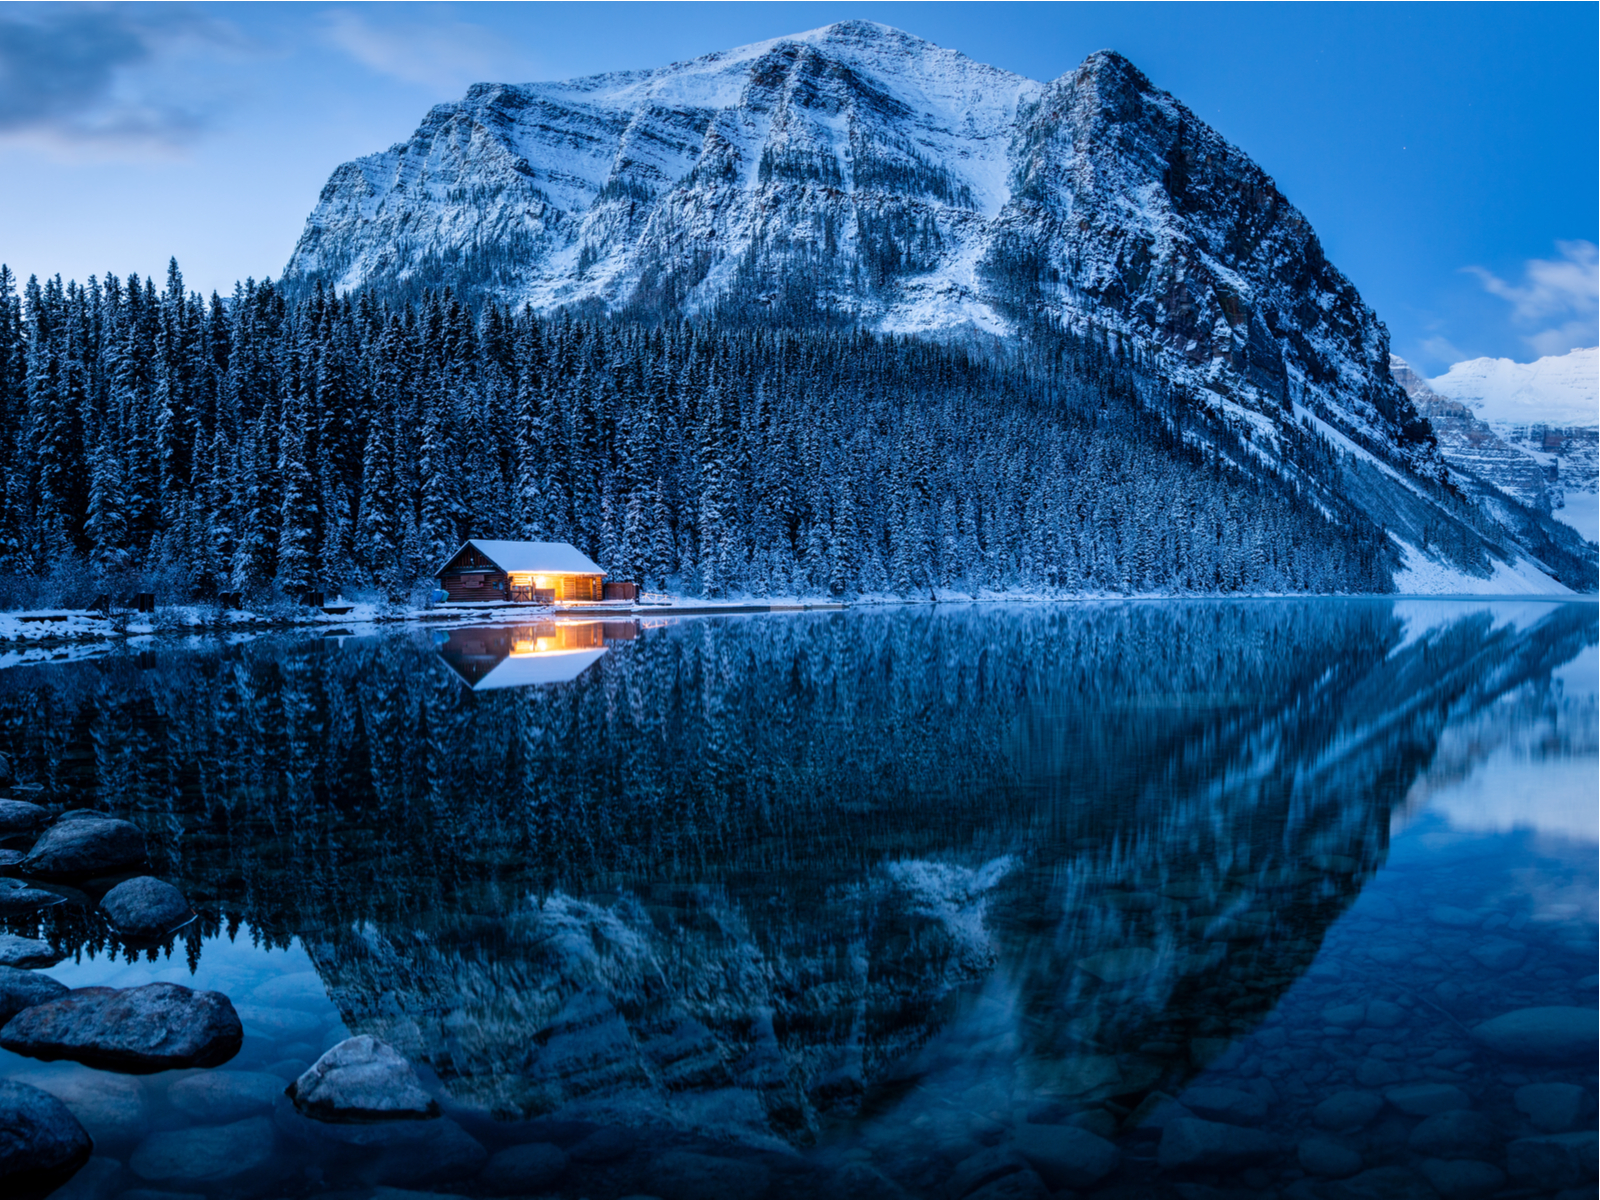 Lake Louise pictured during the cheapest time to visit Banff